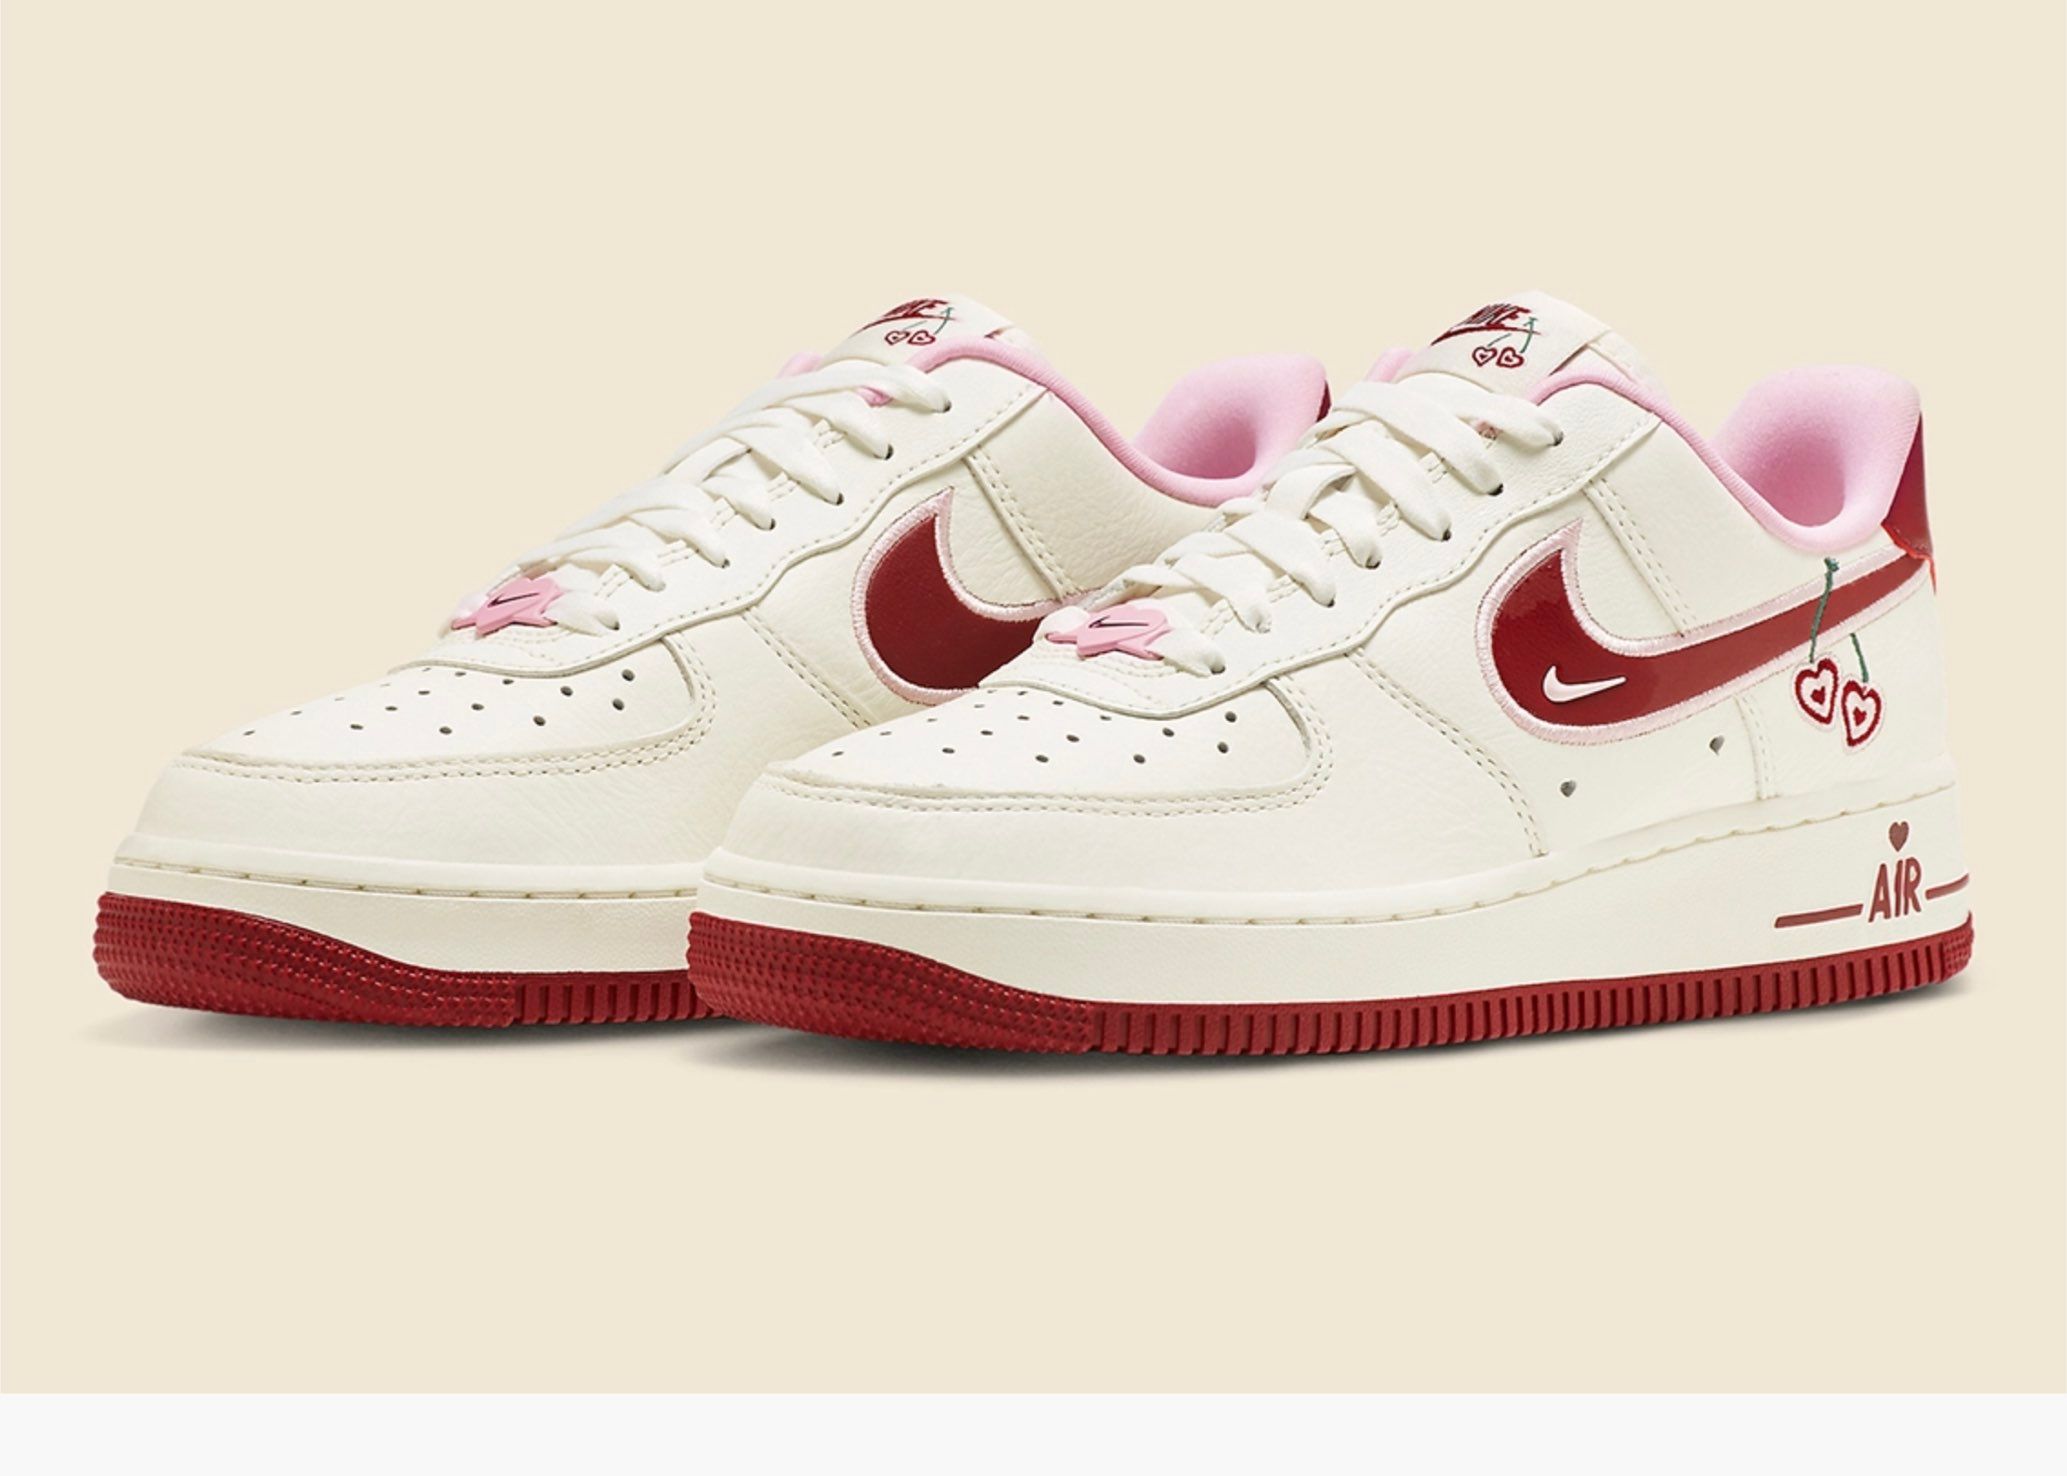 Nike air valentines day. Nike Air Force 1 Low “Valentine’s Day” 2023. Nike Air Force 1 Low Valentine s Day 2023. Nike Air Force 1 Valentine's Day 2023. Nike Air Force Valentines Day 2023.